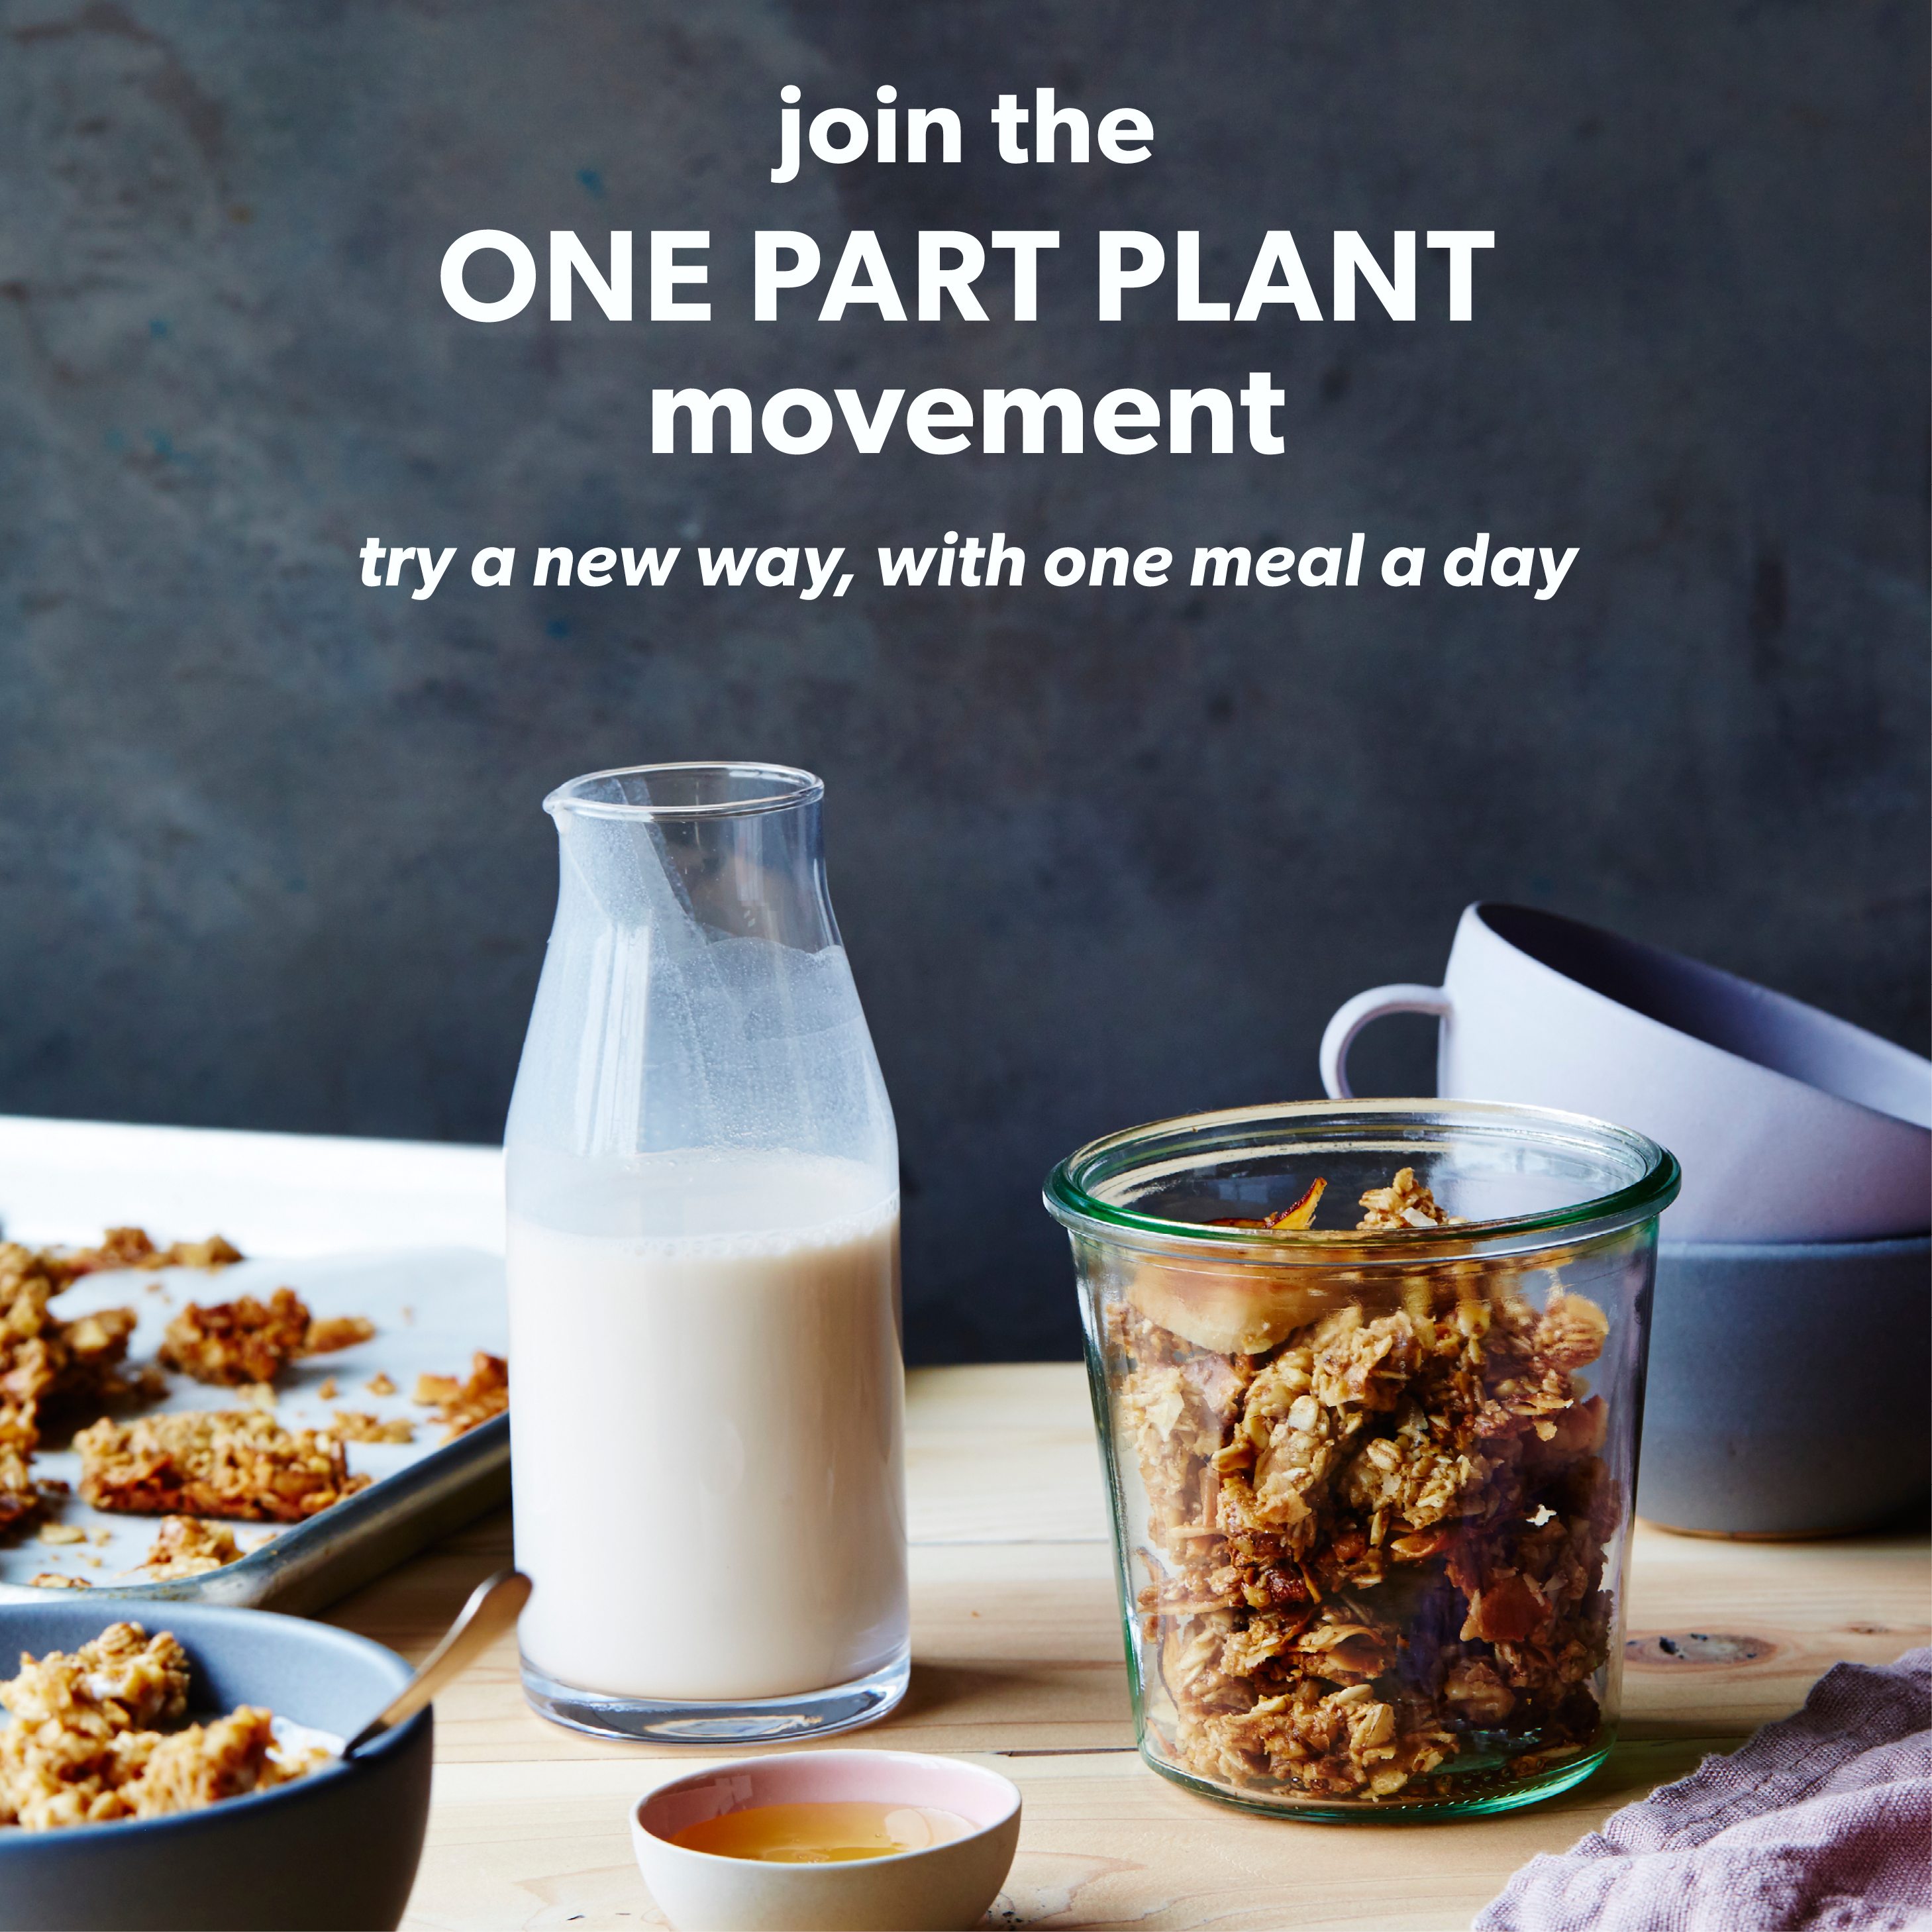 Introducing the One Part Plant 21 Day Challenge and OPP Shoutout #1